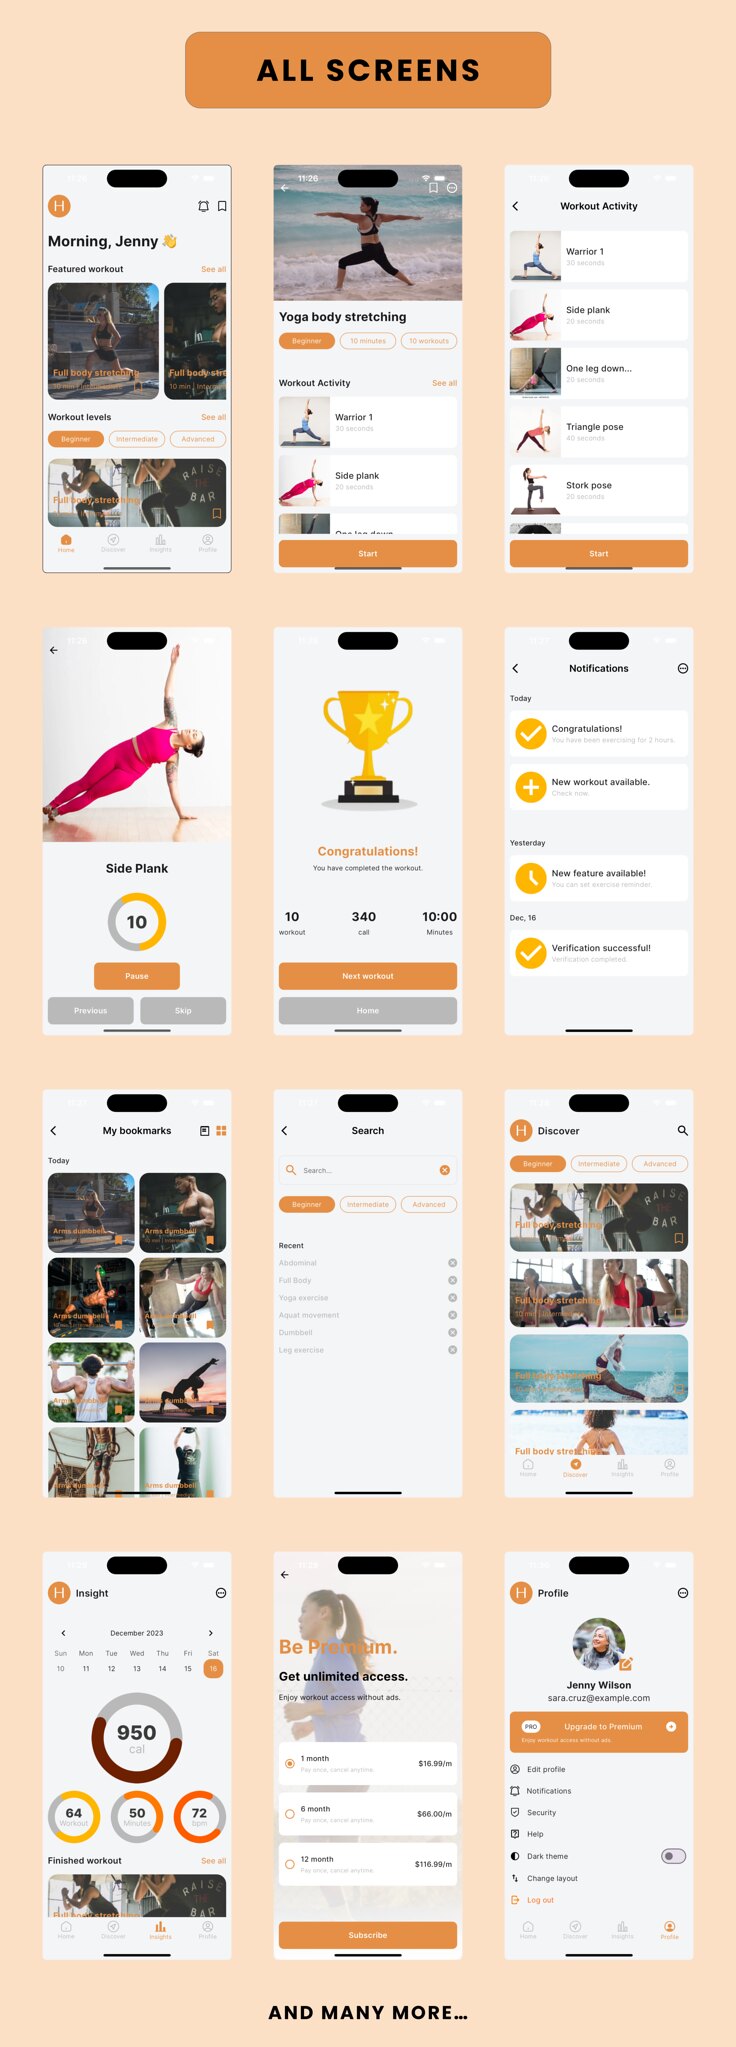 HealthWorkOut App - Fitness Workout | Plan Tracker Flutter App | Android | iOS Mobile App Template